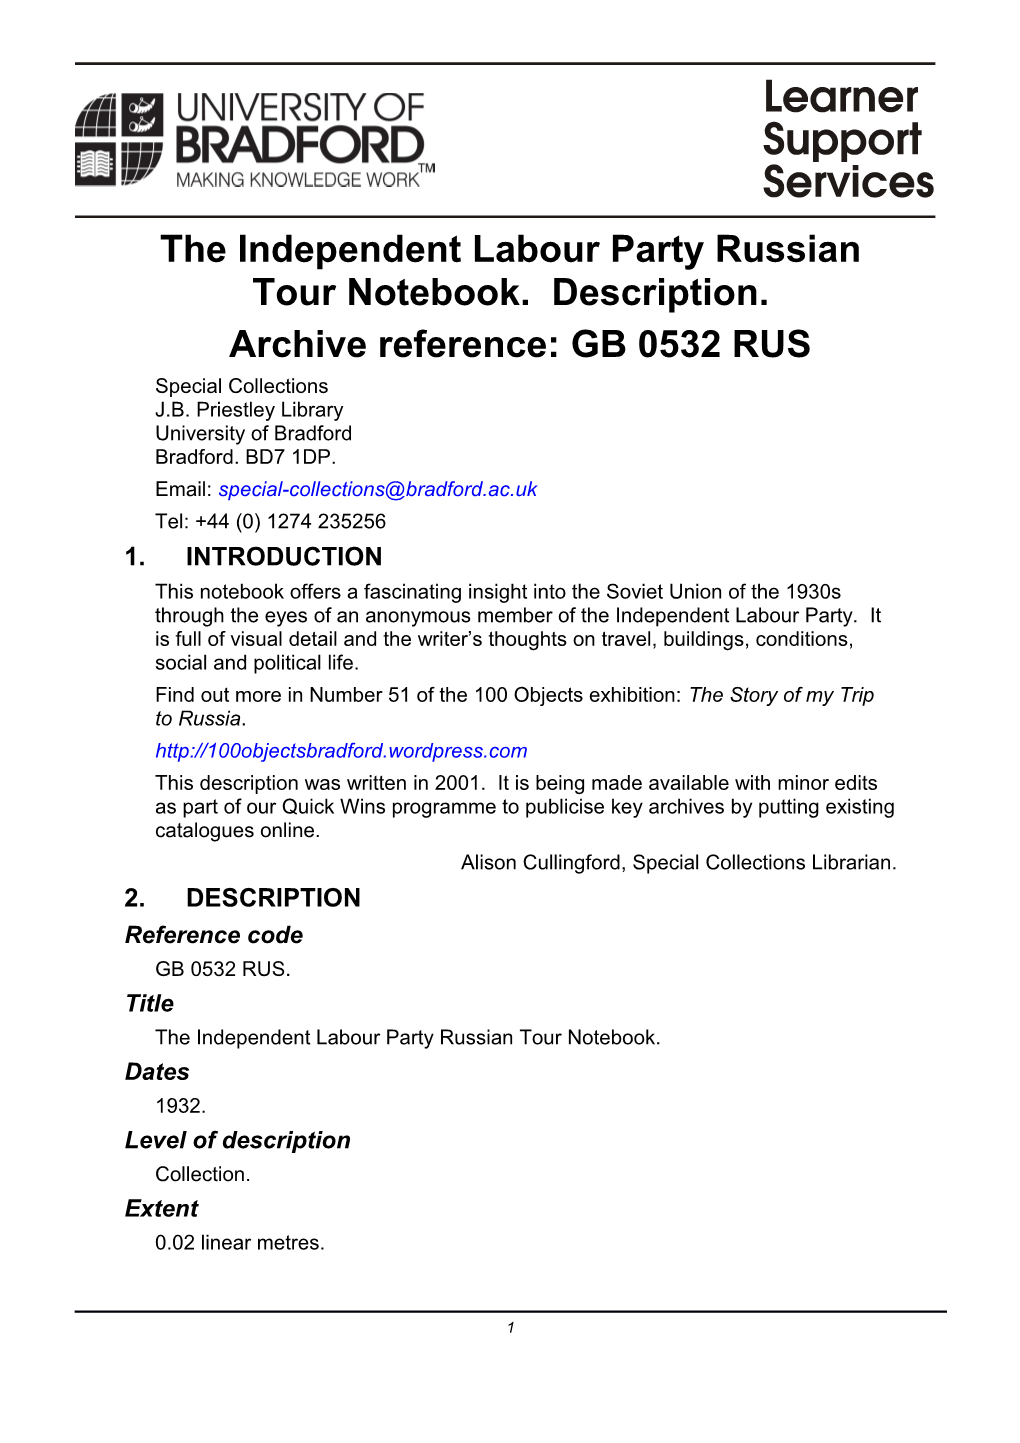 ILP Russian Tour Notebook, Special Collections